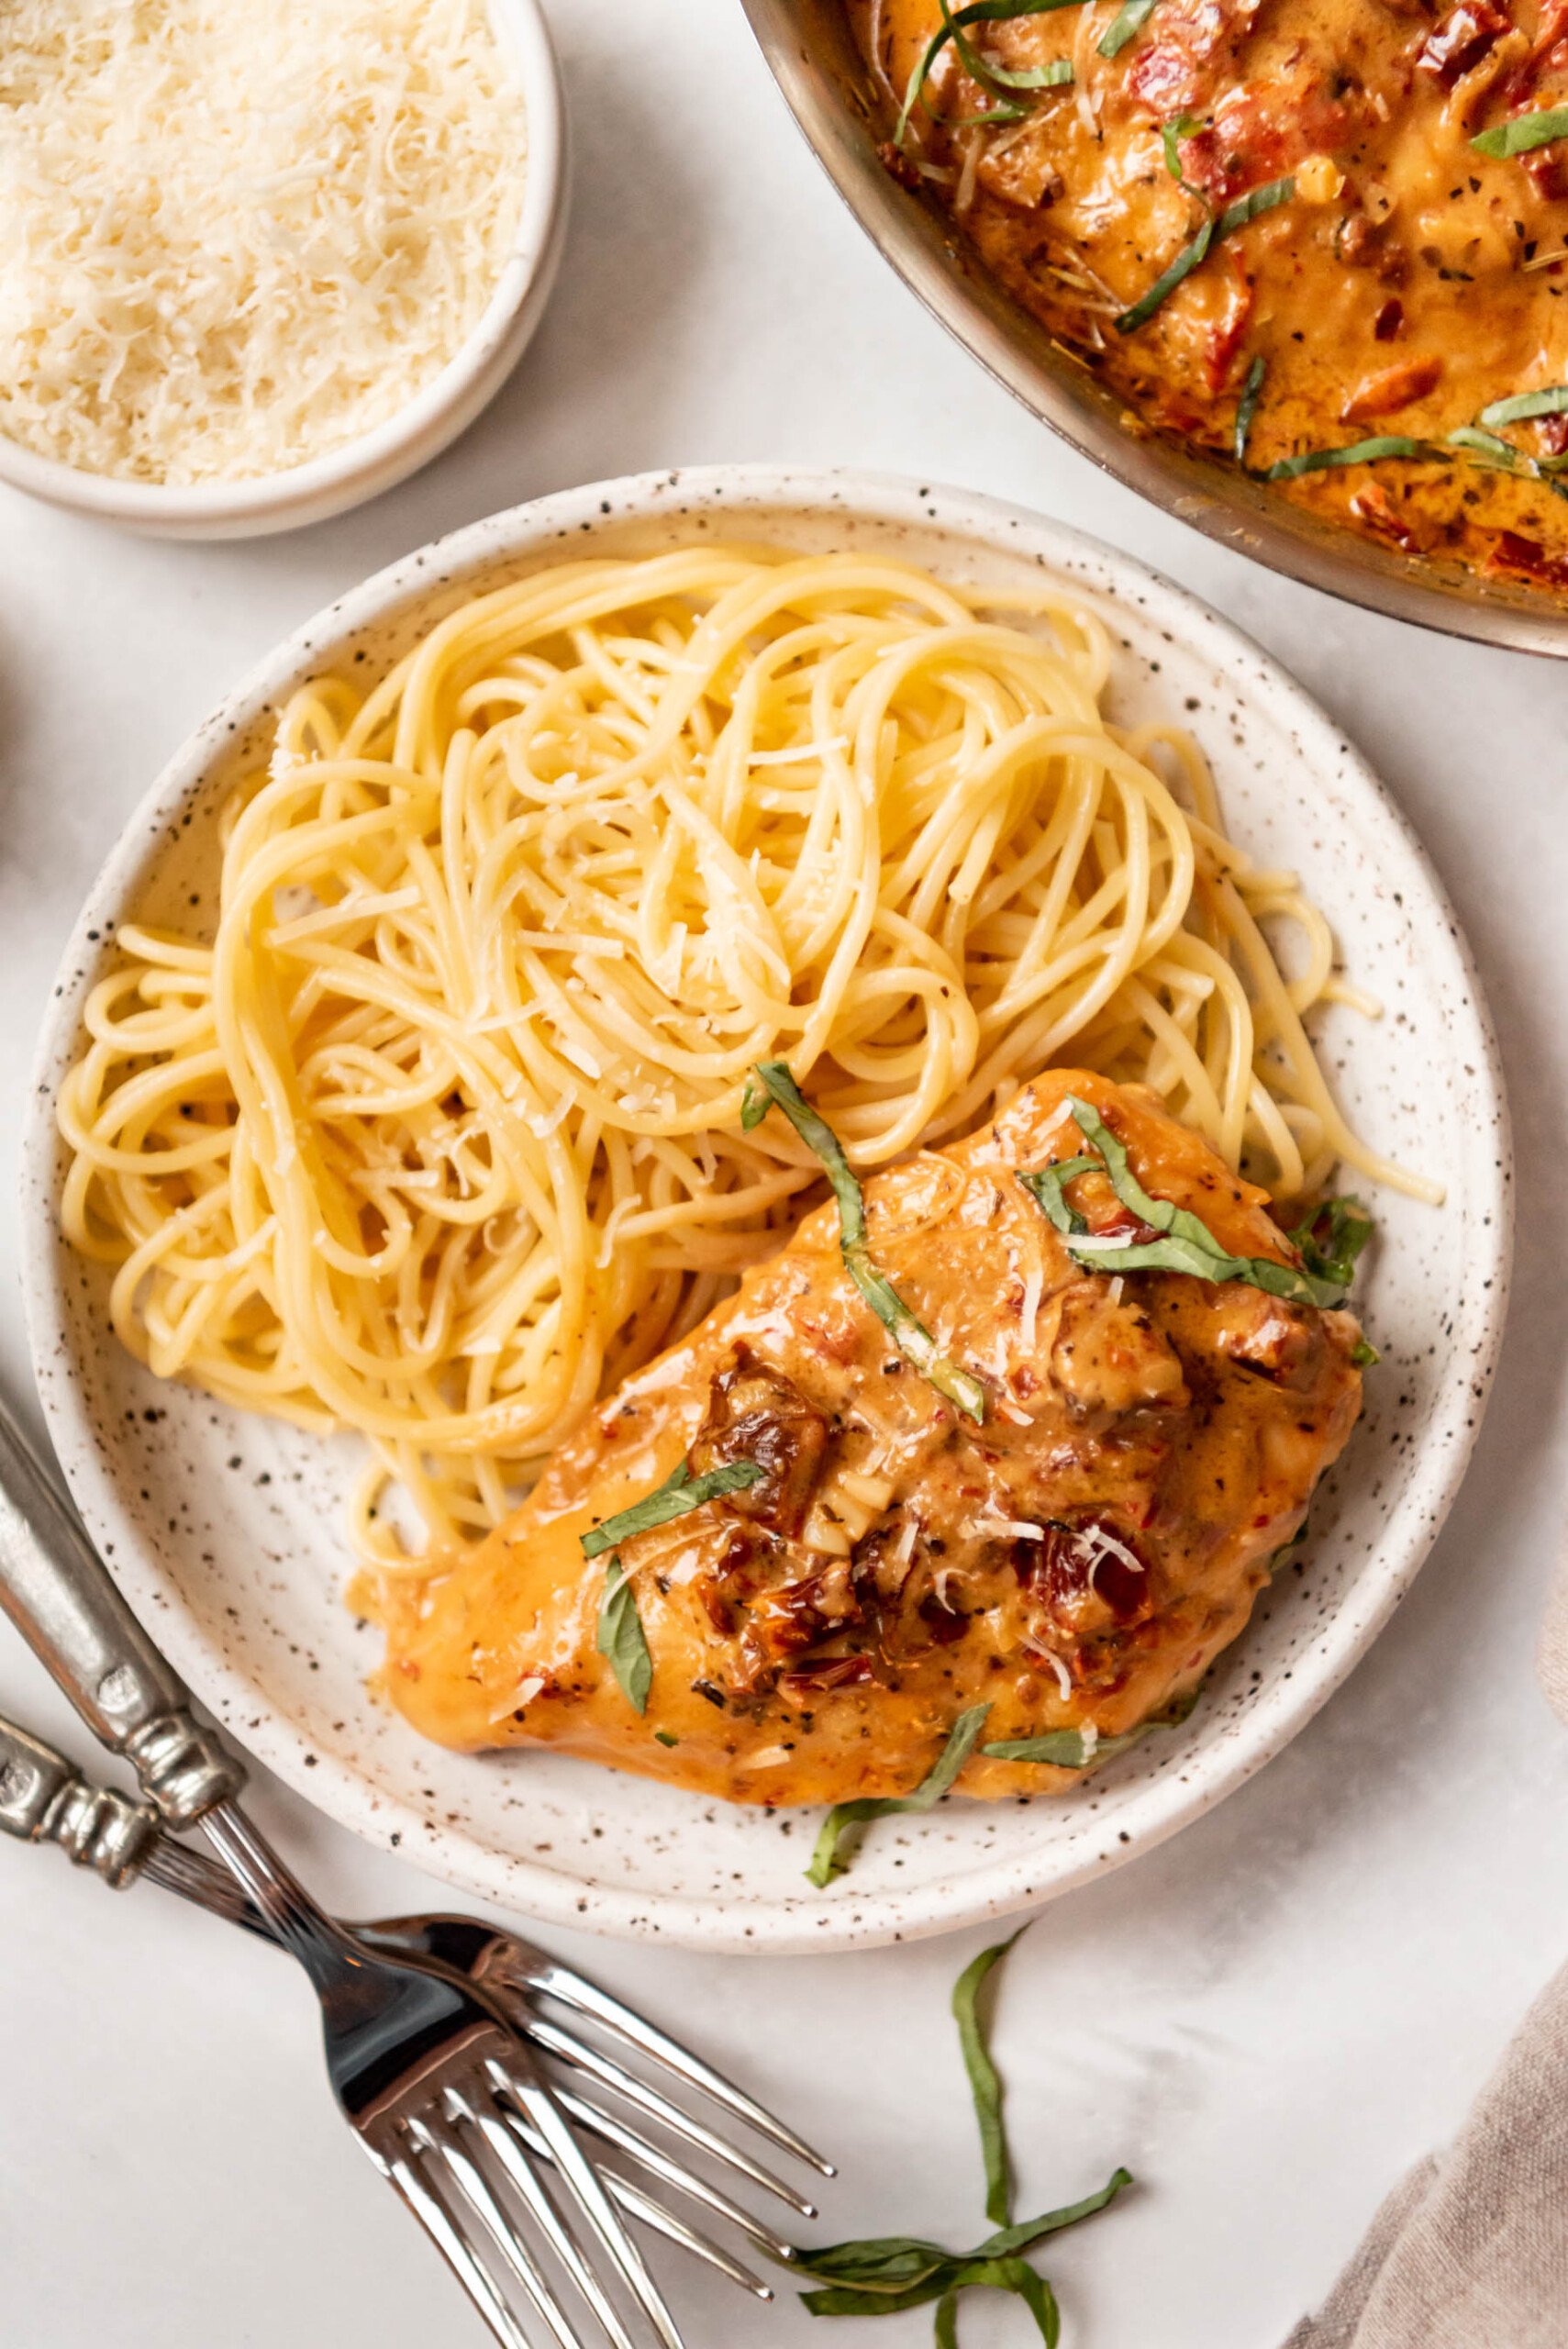 A plate of cooked spaghetti with a chicken breast in creamy sundried tomato sauce.